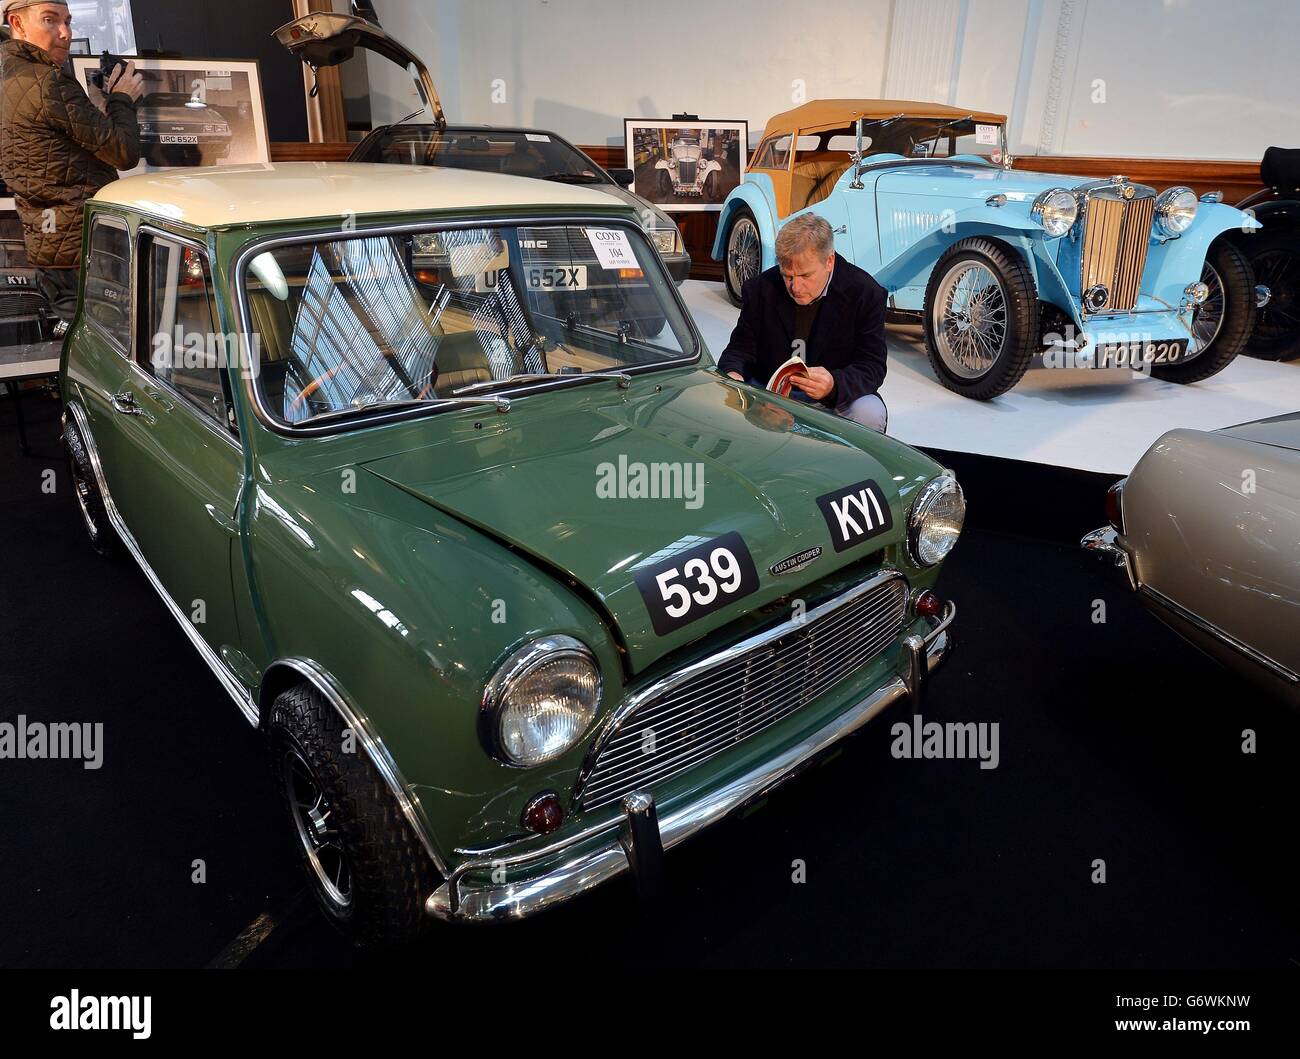 A 1964 Austin Cooper Mini Mark 1 on show at the Royal Horticultural Hall in central London, where the Coys spring classic auction of Vintage cars takes place this evening, and it is expected that the cars will be sold for a total around £2.5million. Stock Photo